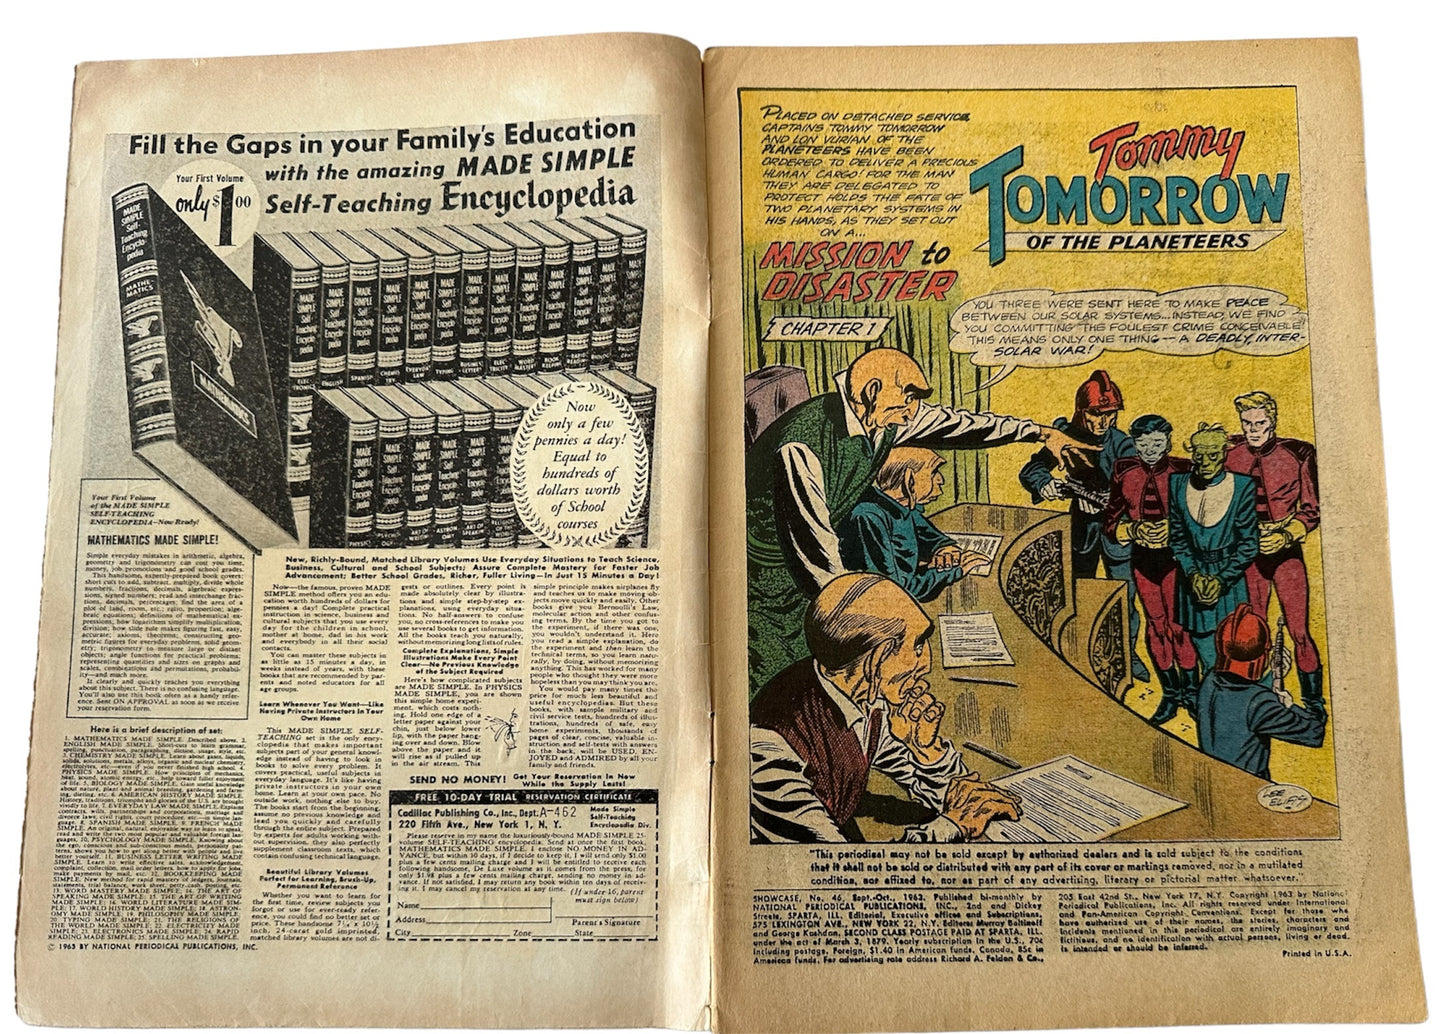 Vintage 1963 DC - Showcase Presents Comic Issue Number 46 - Tommy Tomorrow Of The Planeteers - Good Condition Vintage Comic